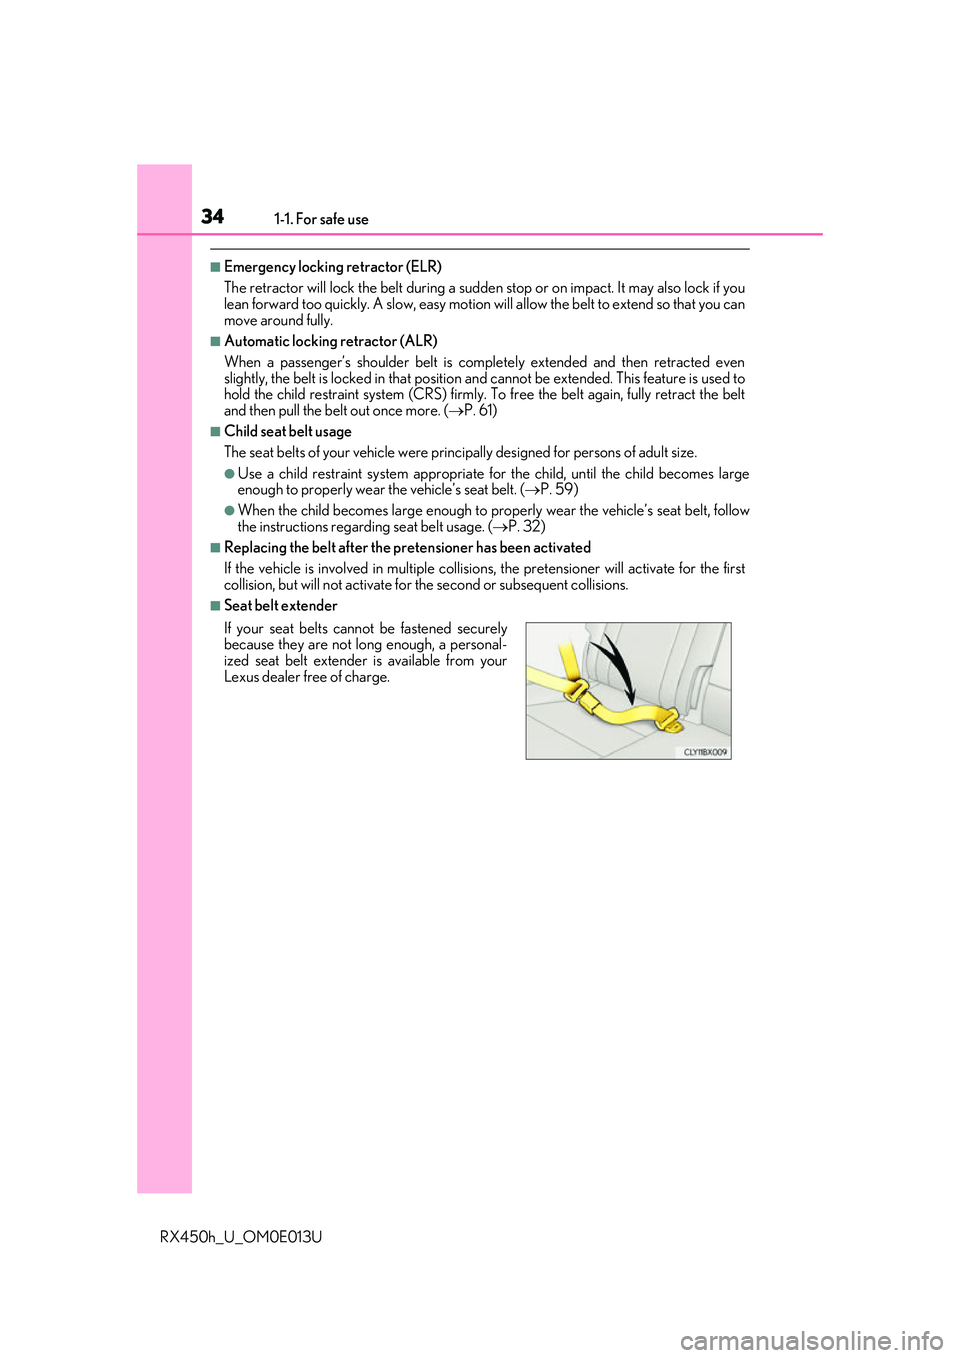 LEXUS RX450H 2016 Owners Guide 341-1. For safe use
RX450h_U_OM0E013U
■Emergency locking retractor (ELR)
The retractor will lock the belt during a sudden stop or on impact. It may also lock if you
lean forward too quickly. A slow,